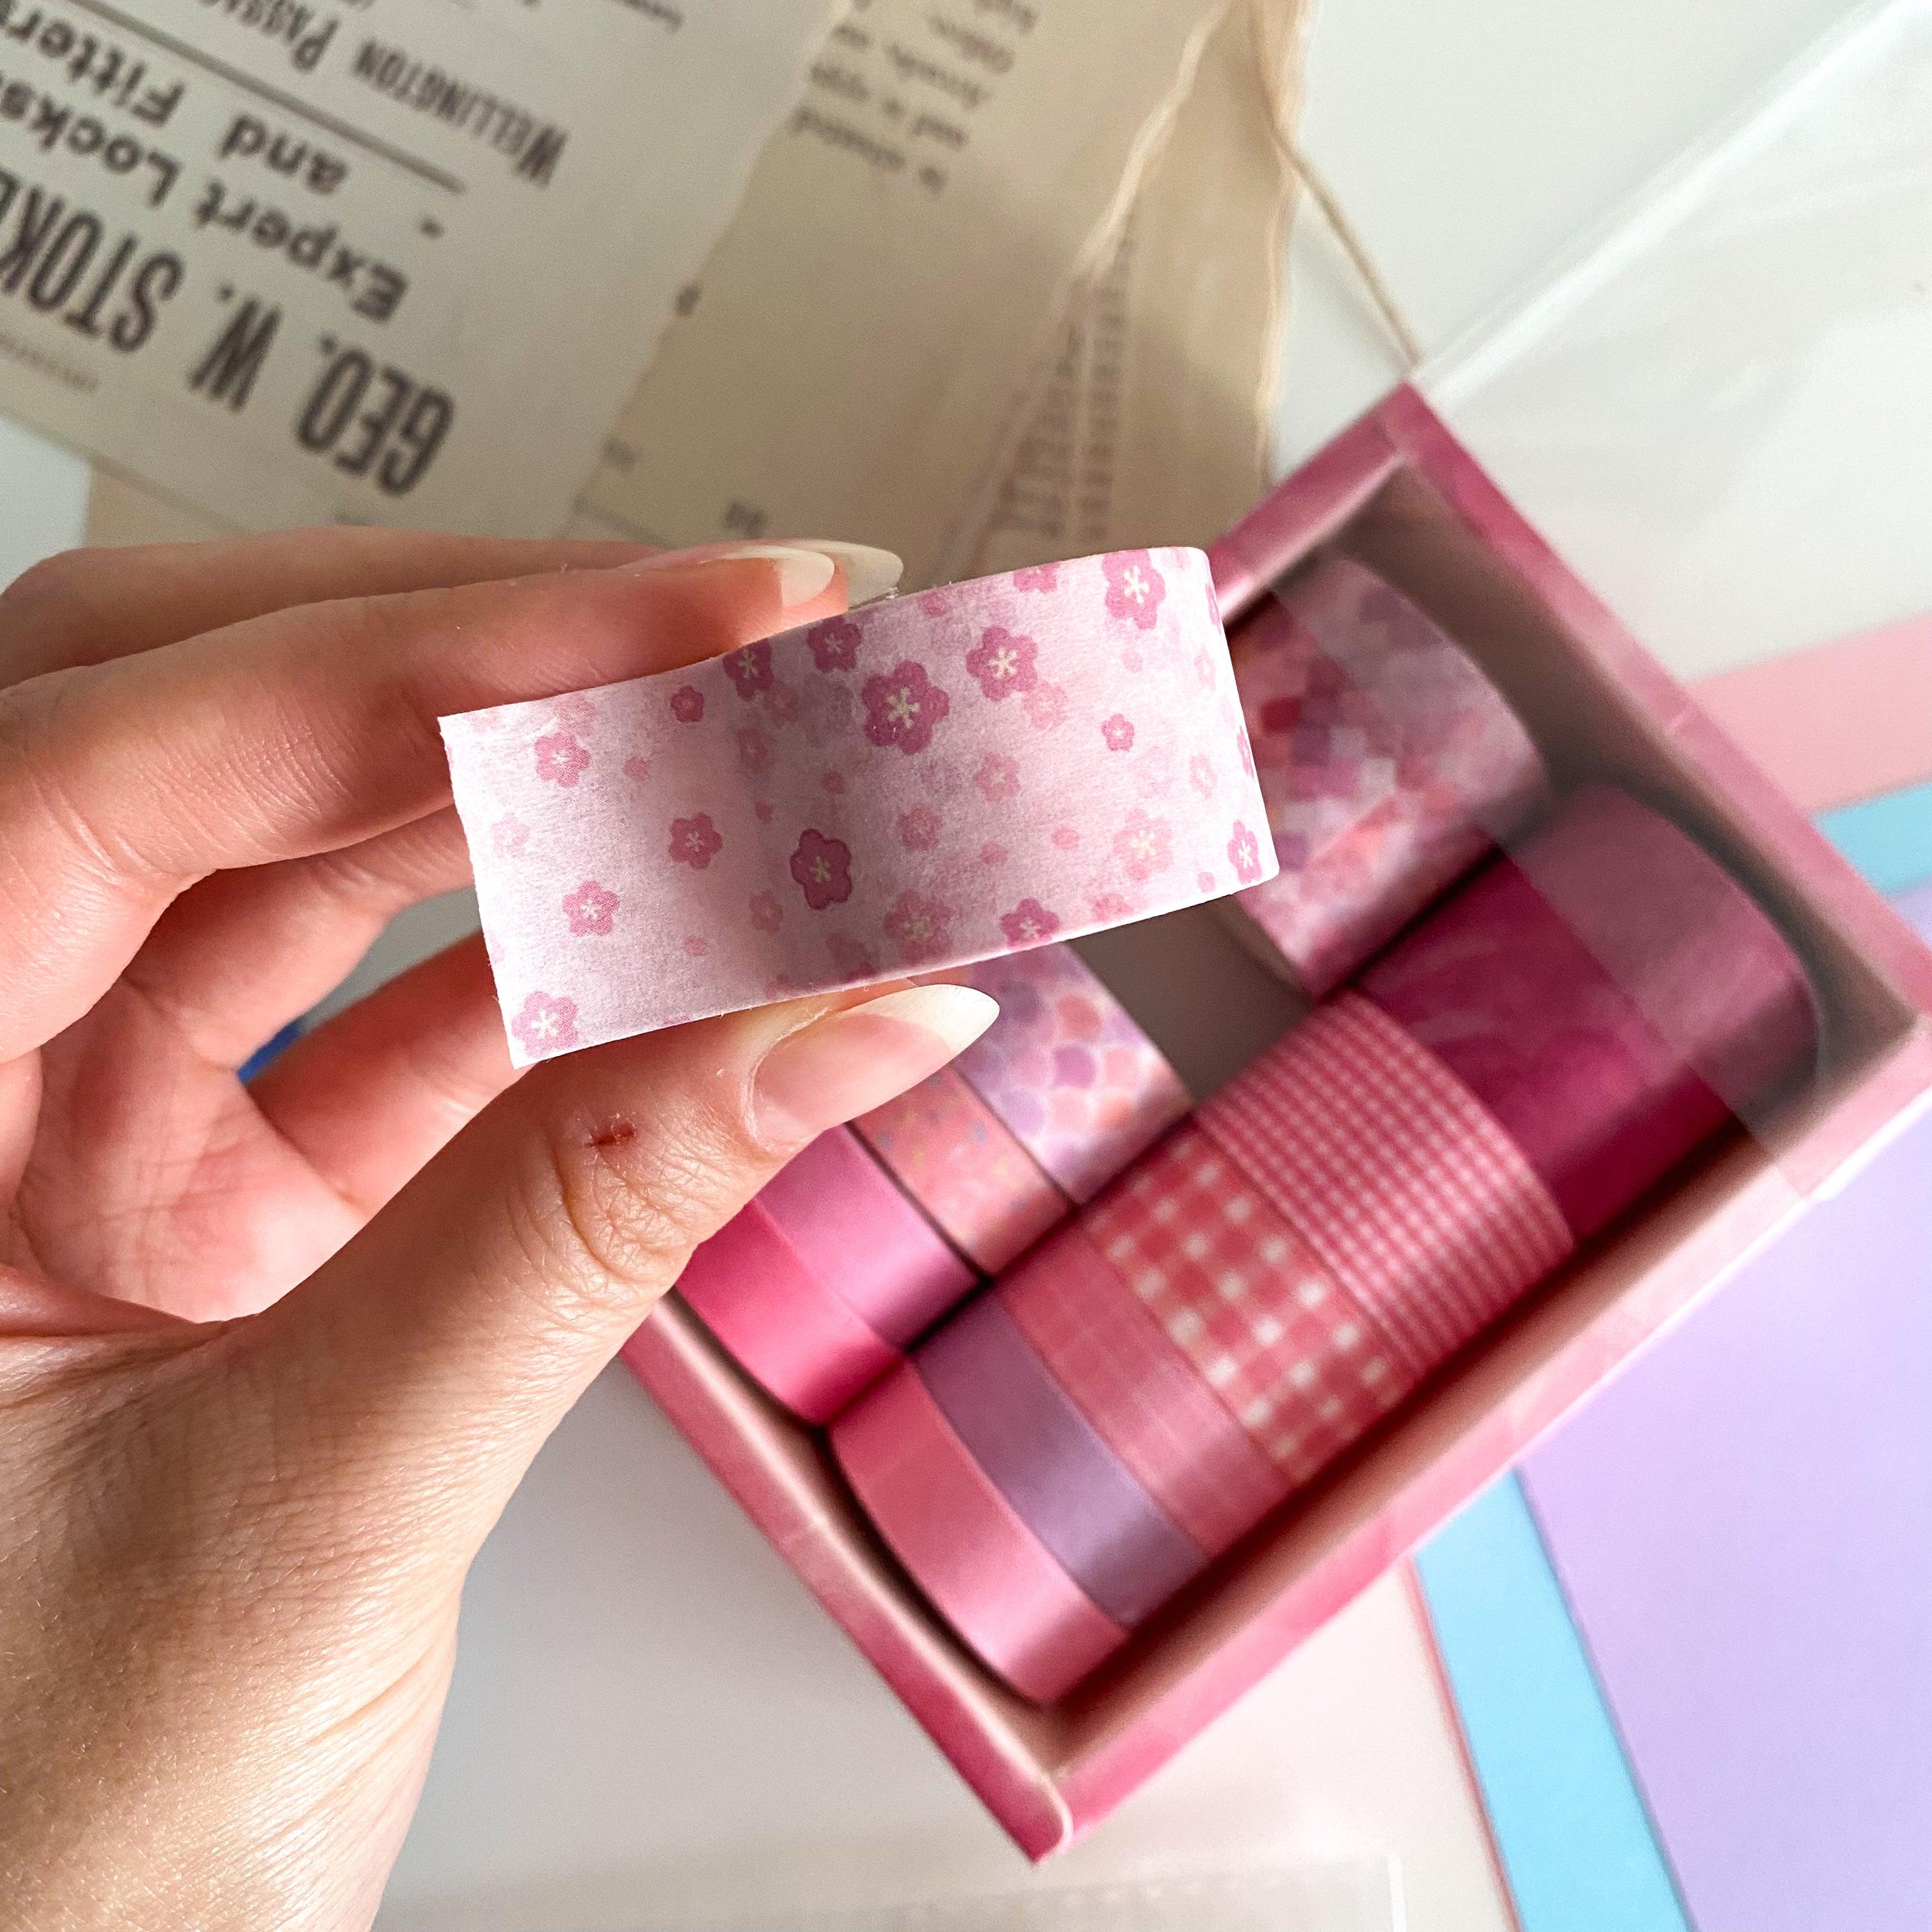 DIY Phone Case Spring Box - Personalize Your Phone for Journaling &amp; Scrapbooking - PaperWrld